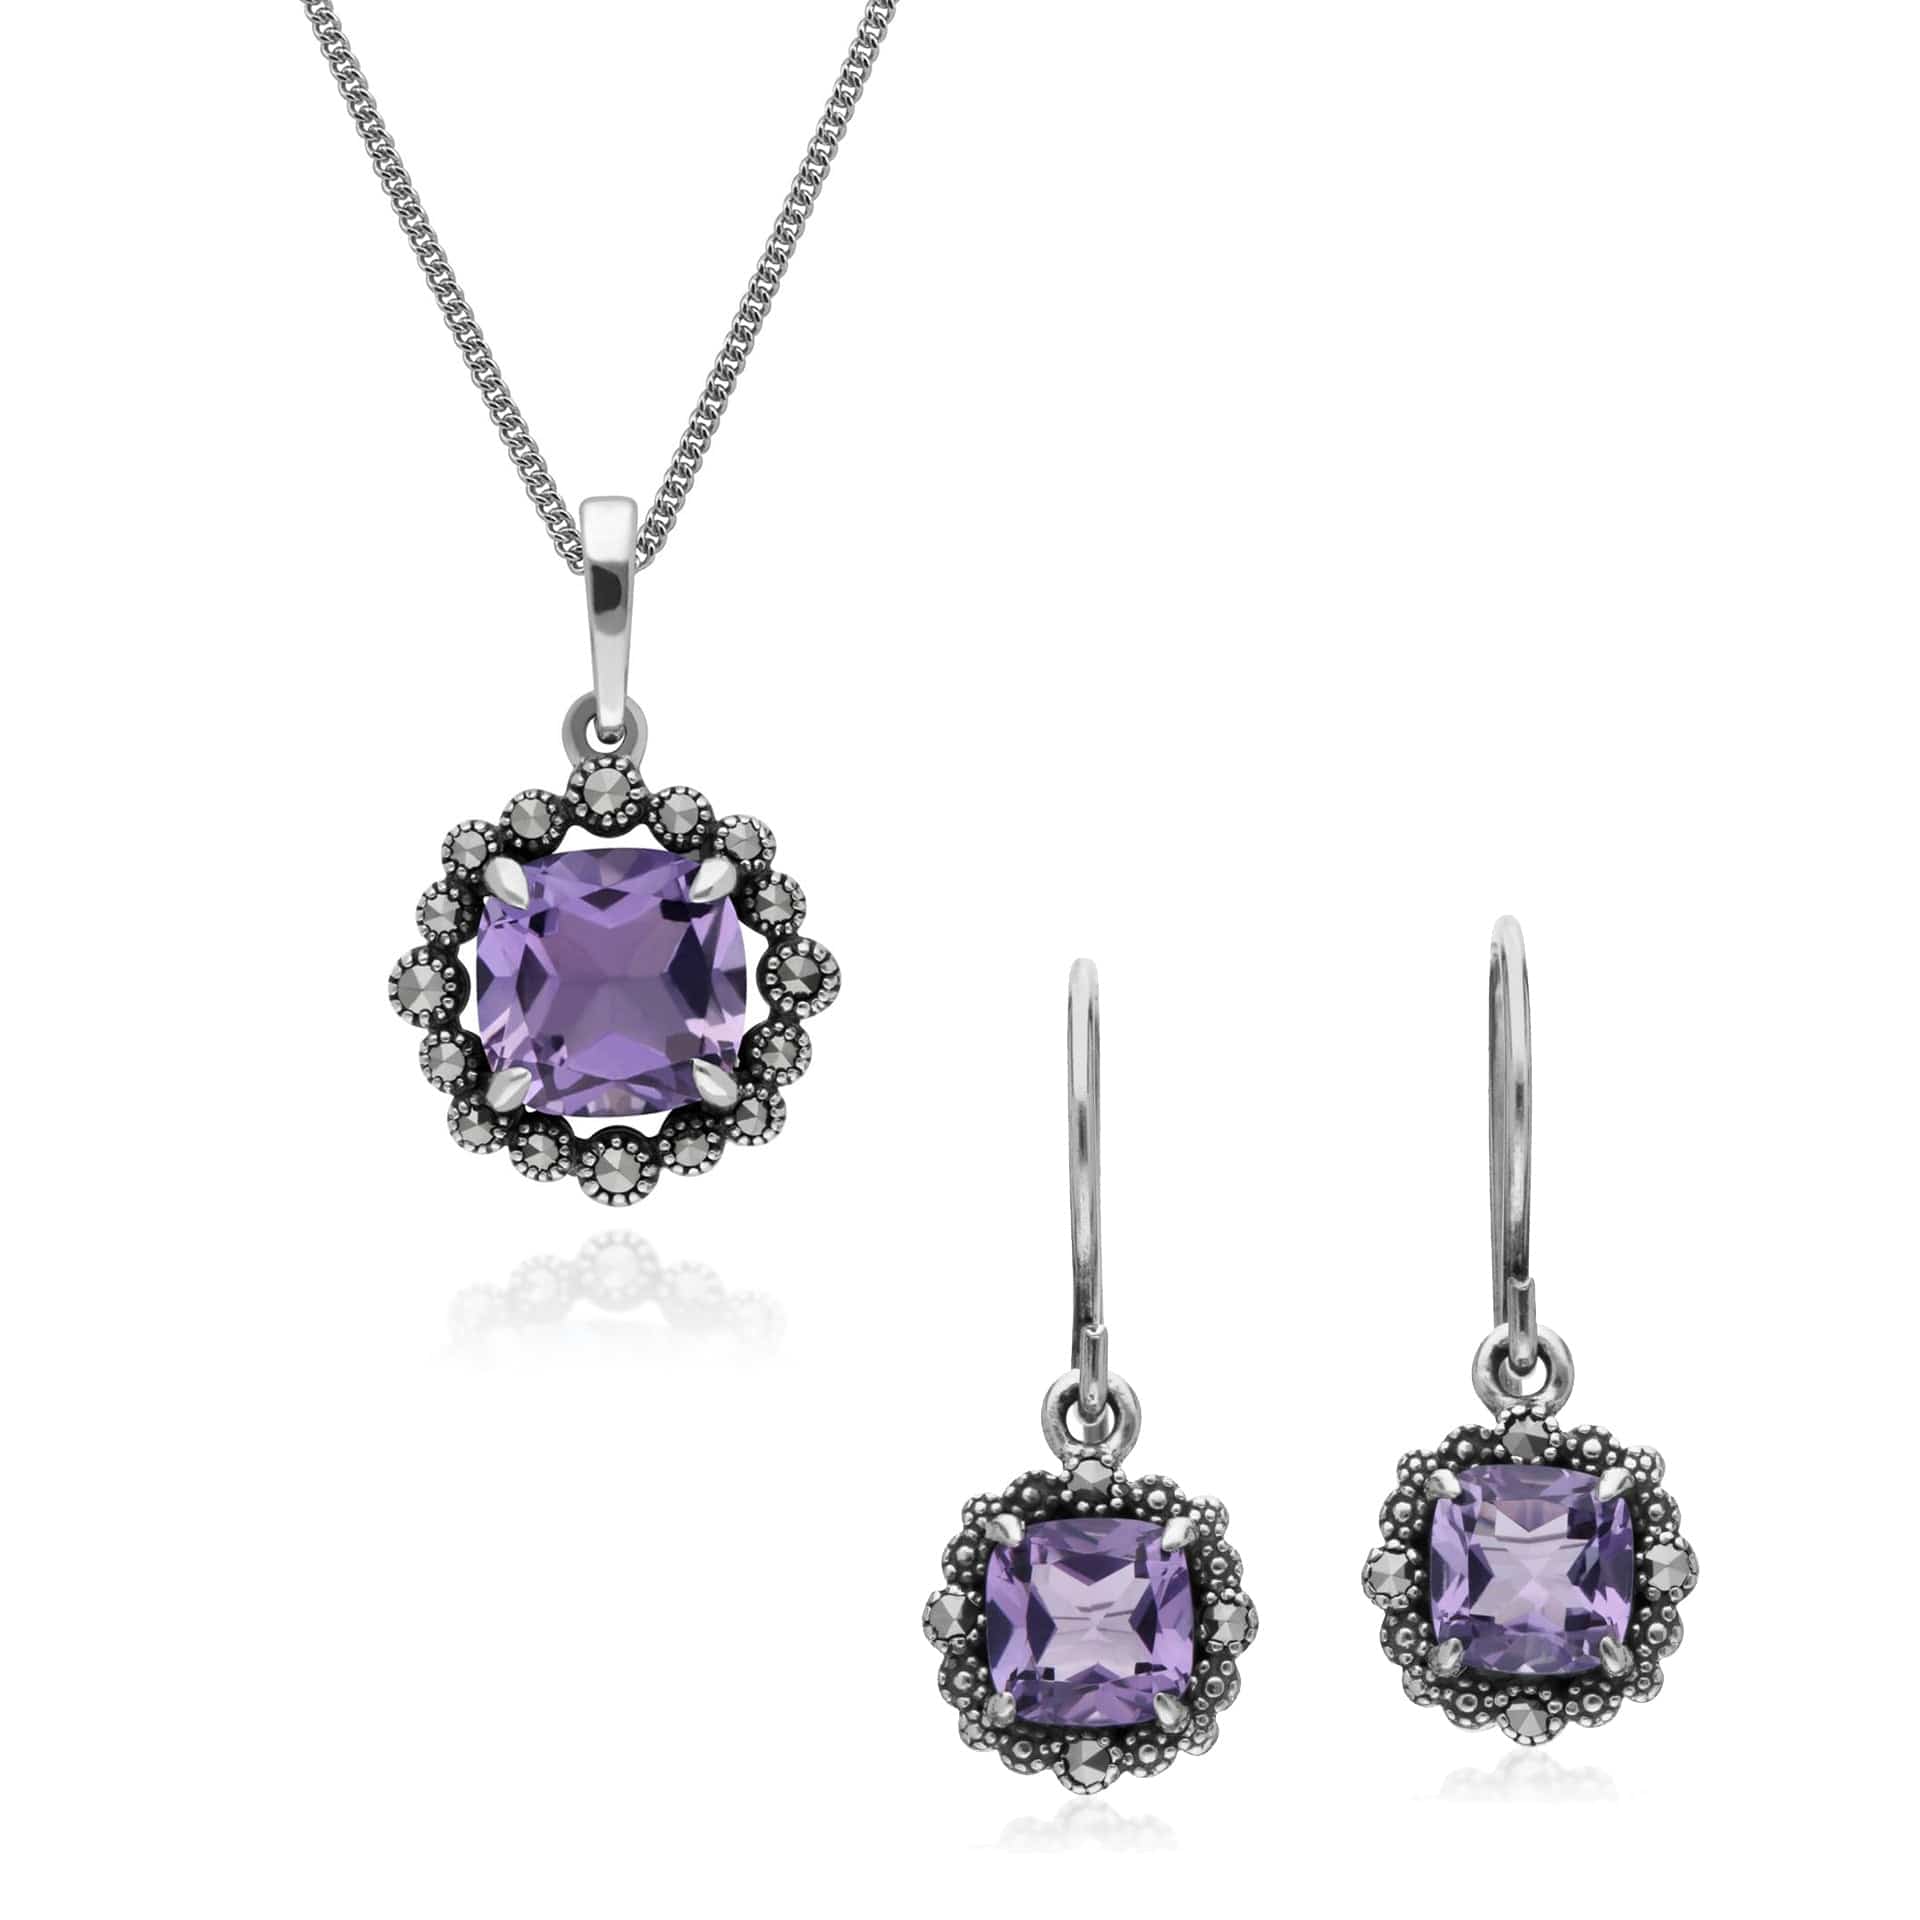 214E870902925-214P301501925 Art Deco Style Cushion Amethyst & Marcasite Cushion Drop Earrings & Necklace Set in 925 Sterling Silver 1